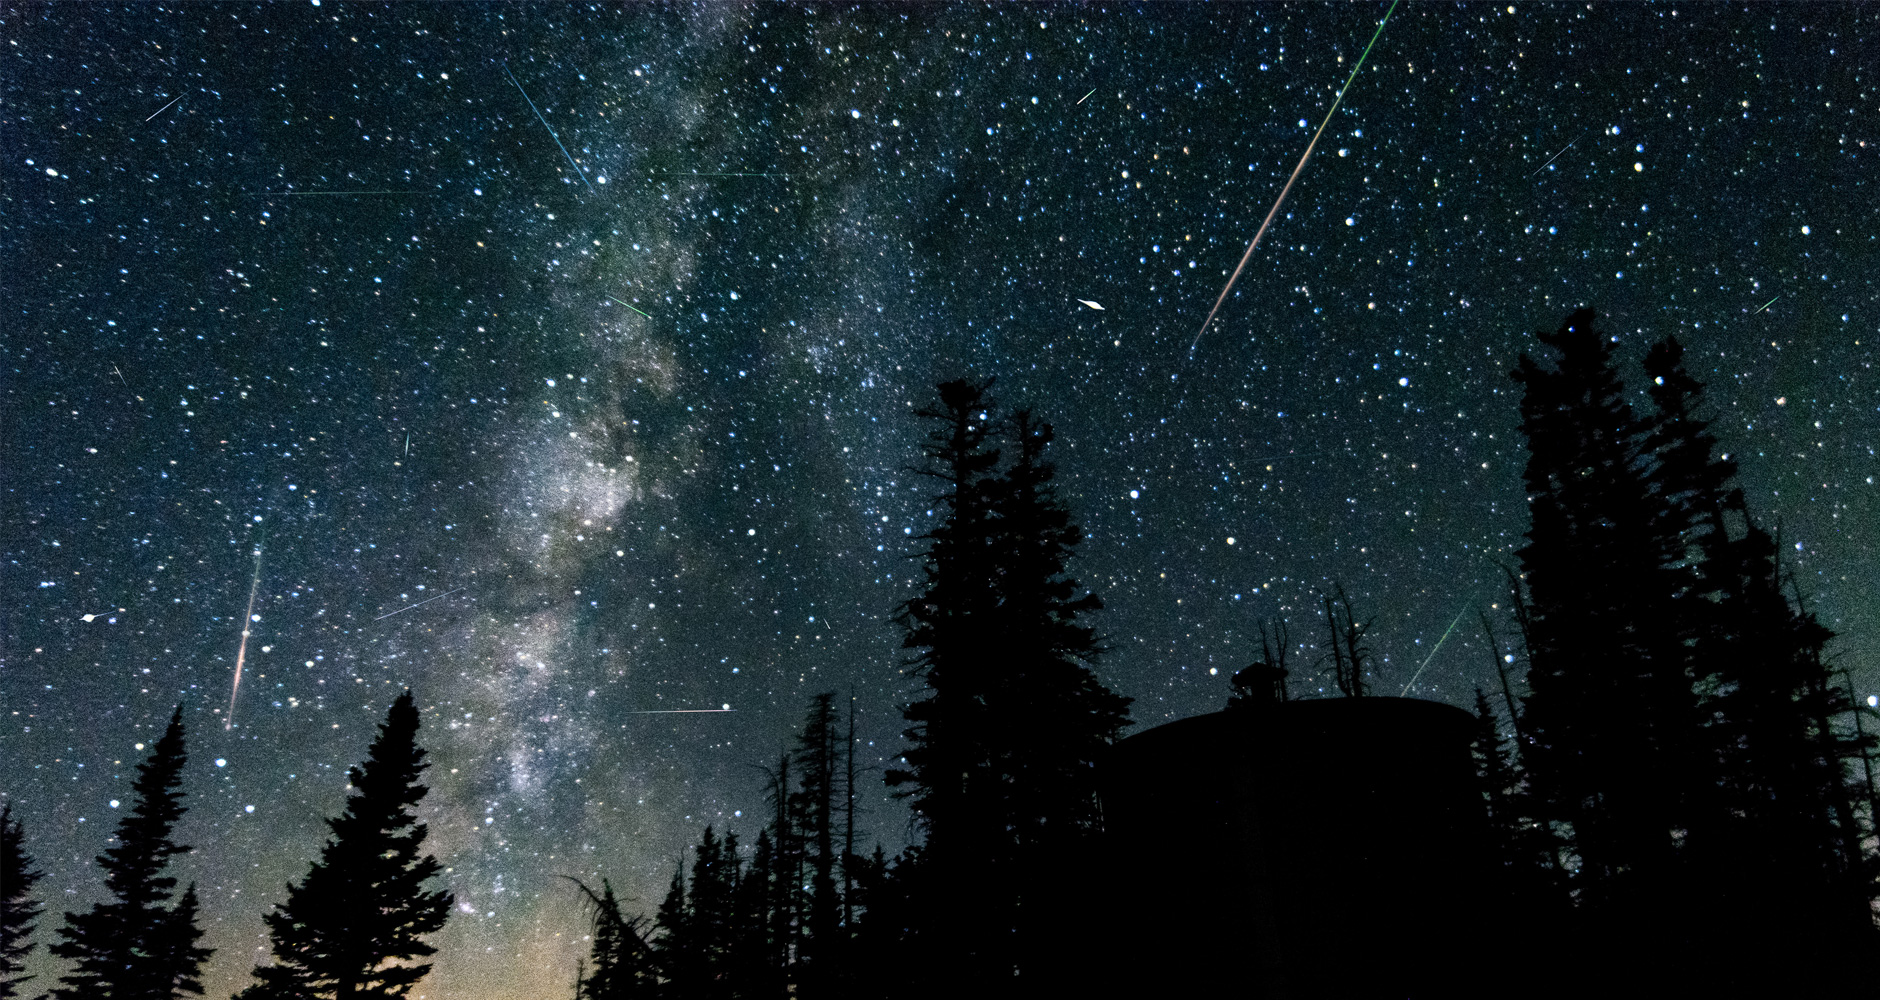 Canadians Will See a Breathtaking Event on 1213 August The Perseids